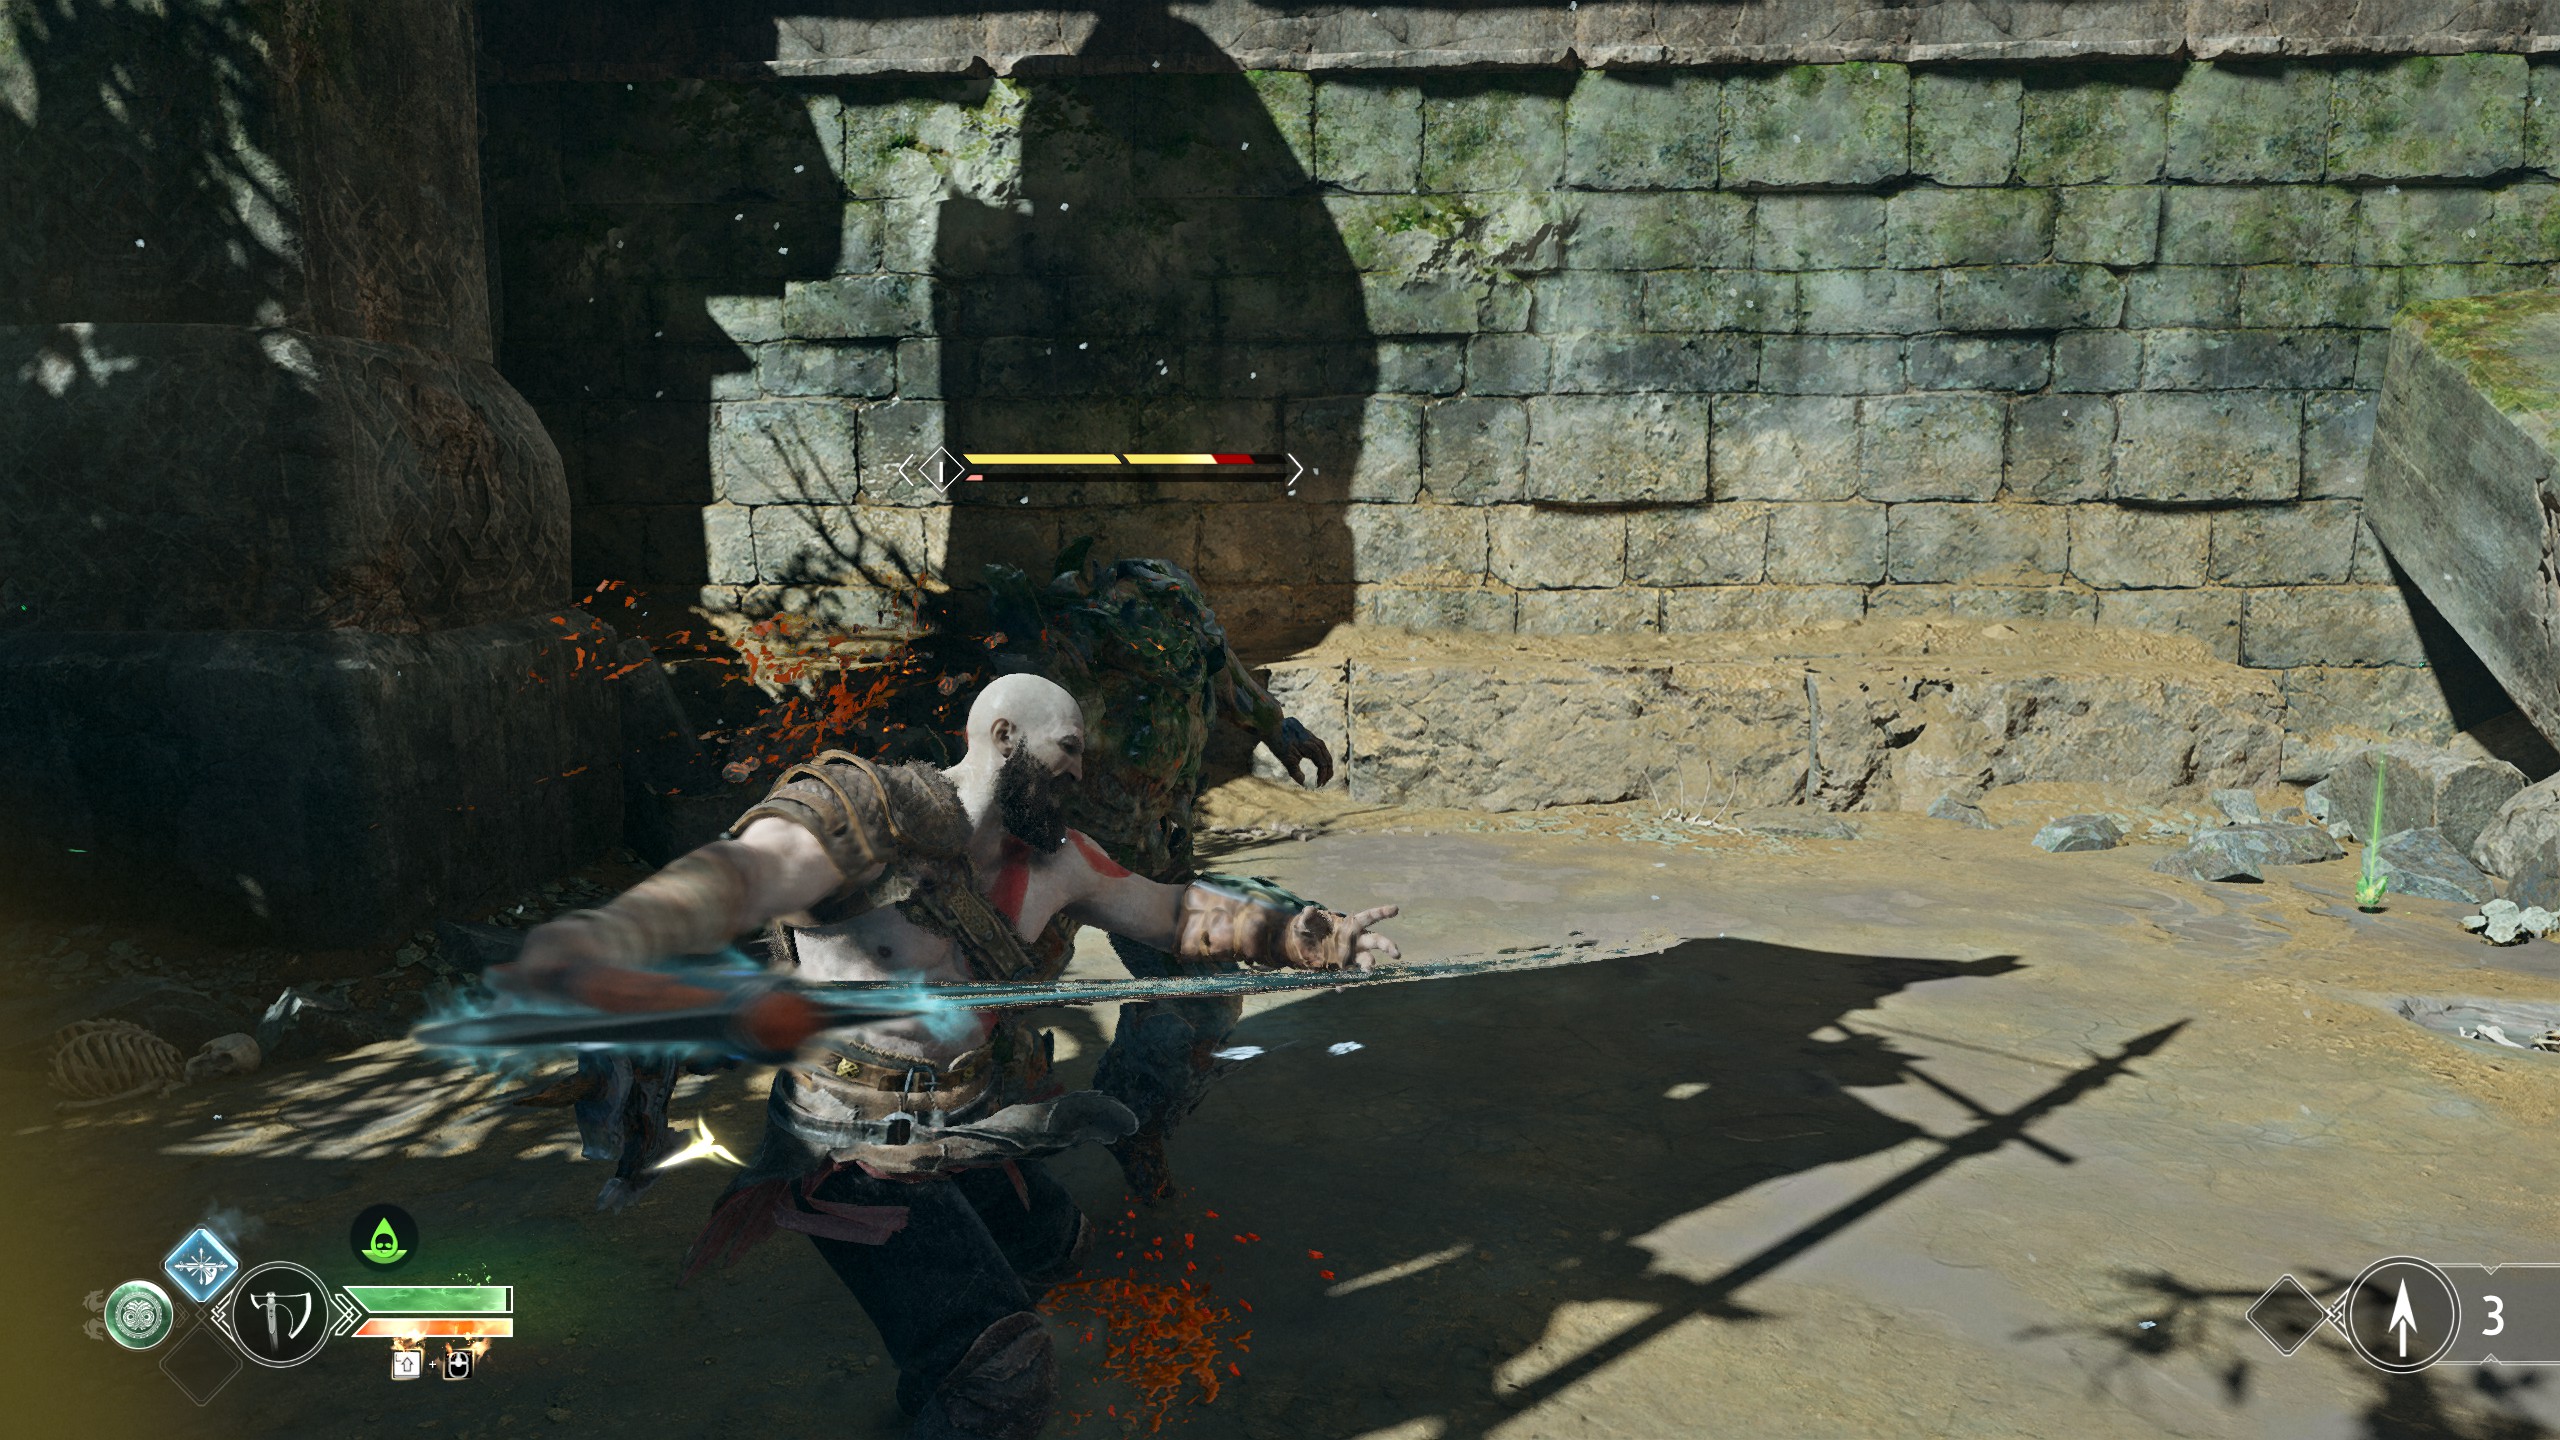 Kratos fighting in God of War on PC